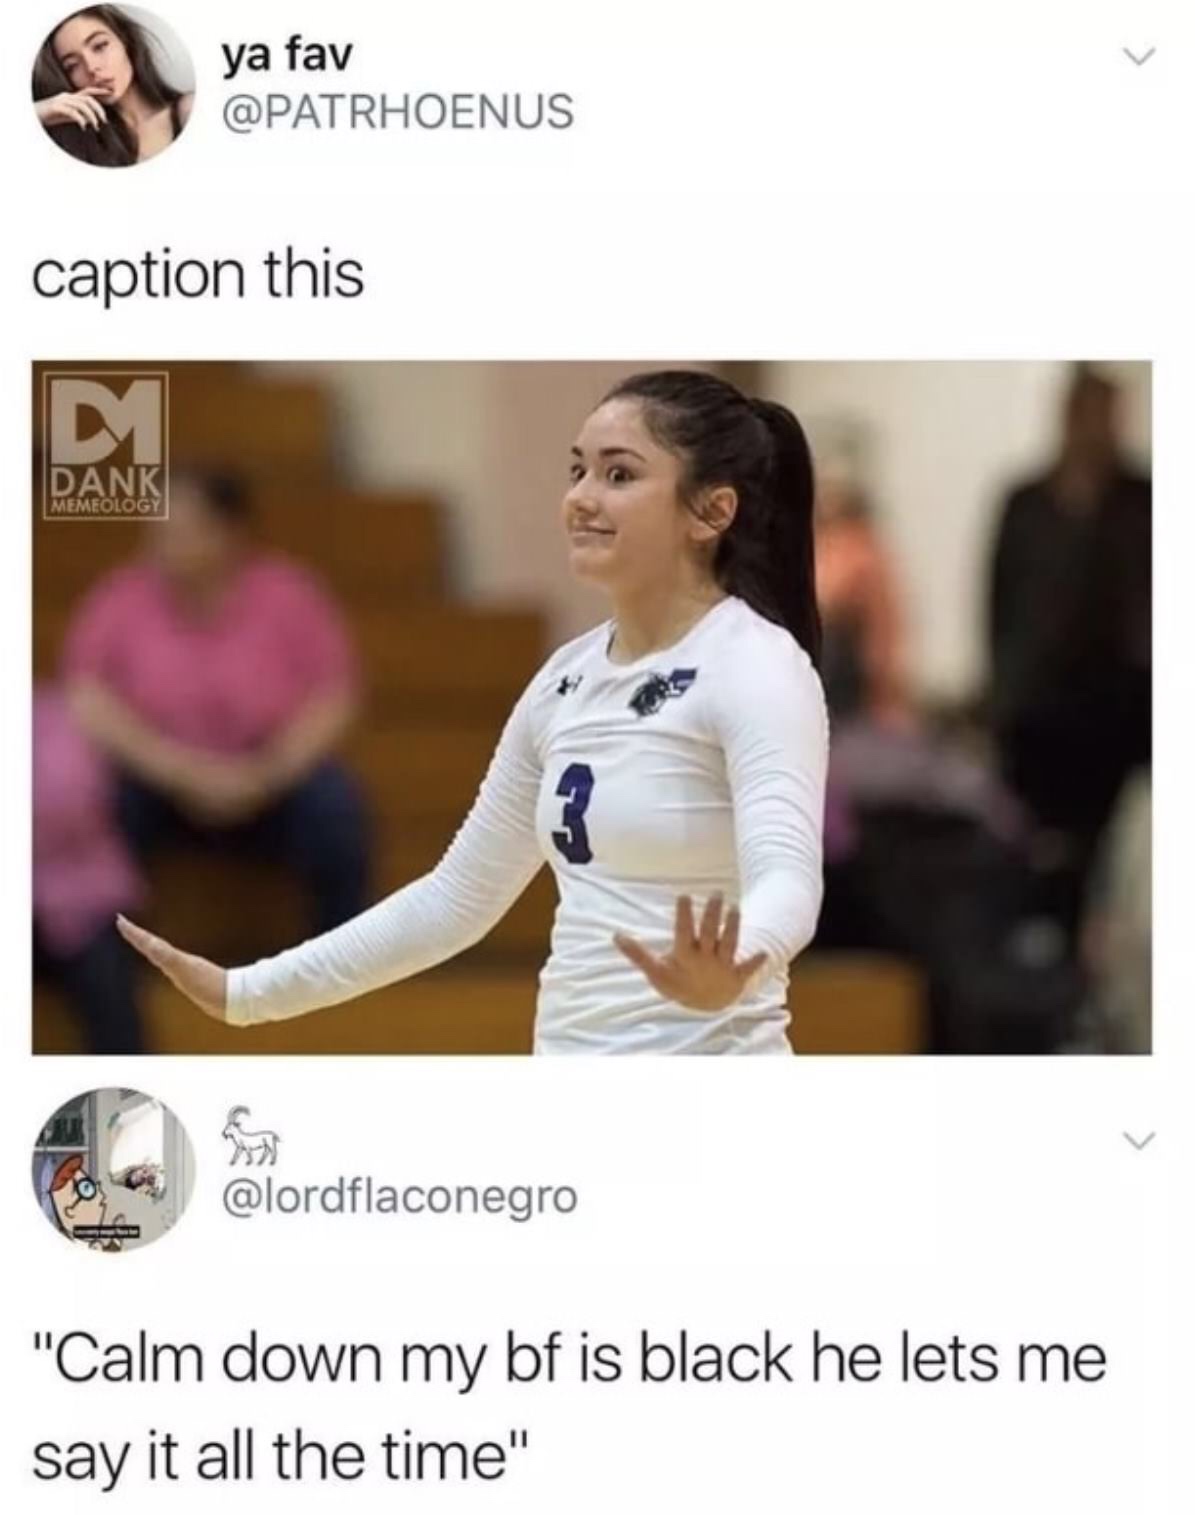 too close to home meme - ya fav caption this Bank a bordflaconegro "Calm down my bf is black he lets me say it all the time"